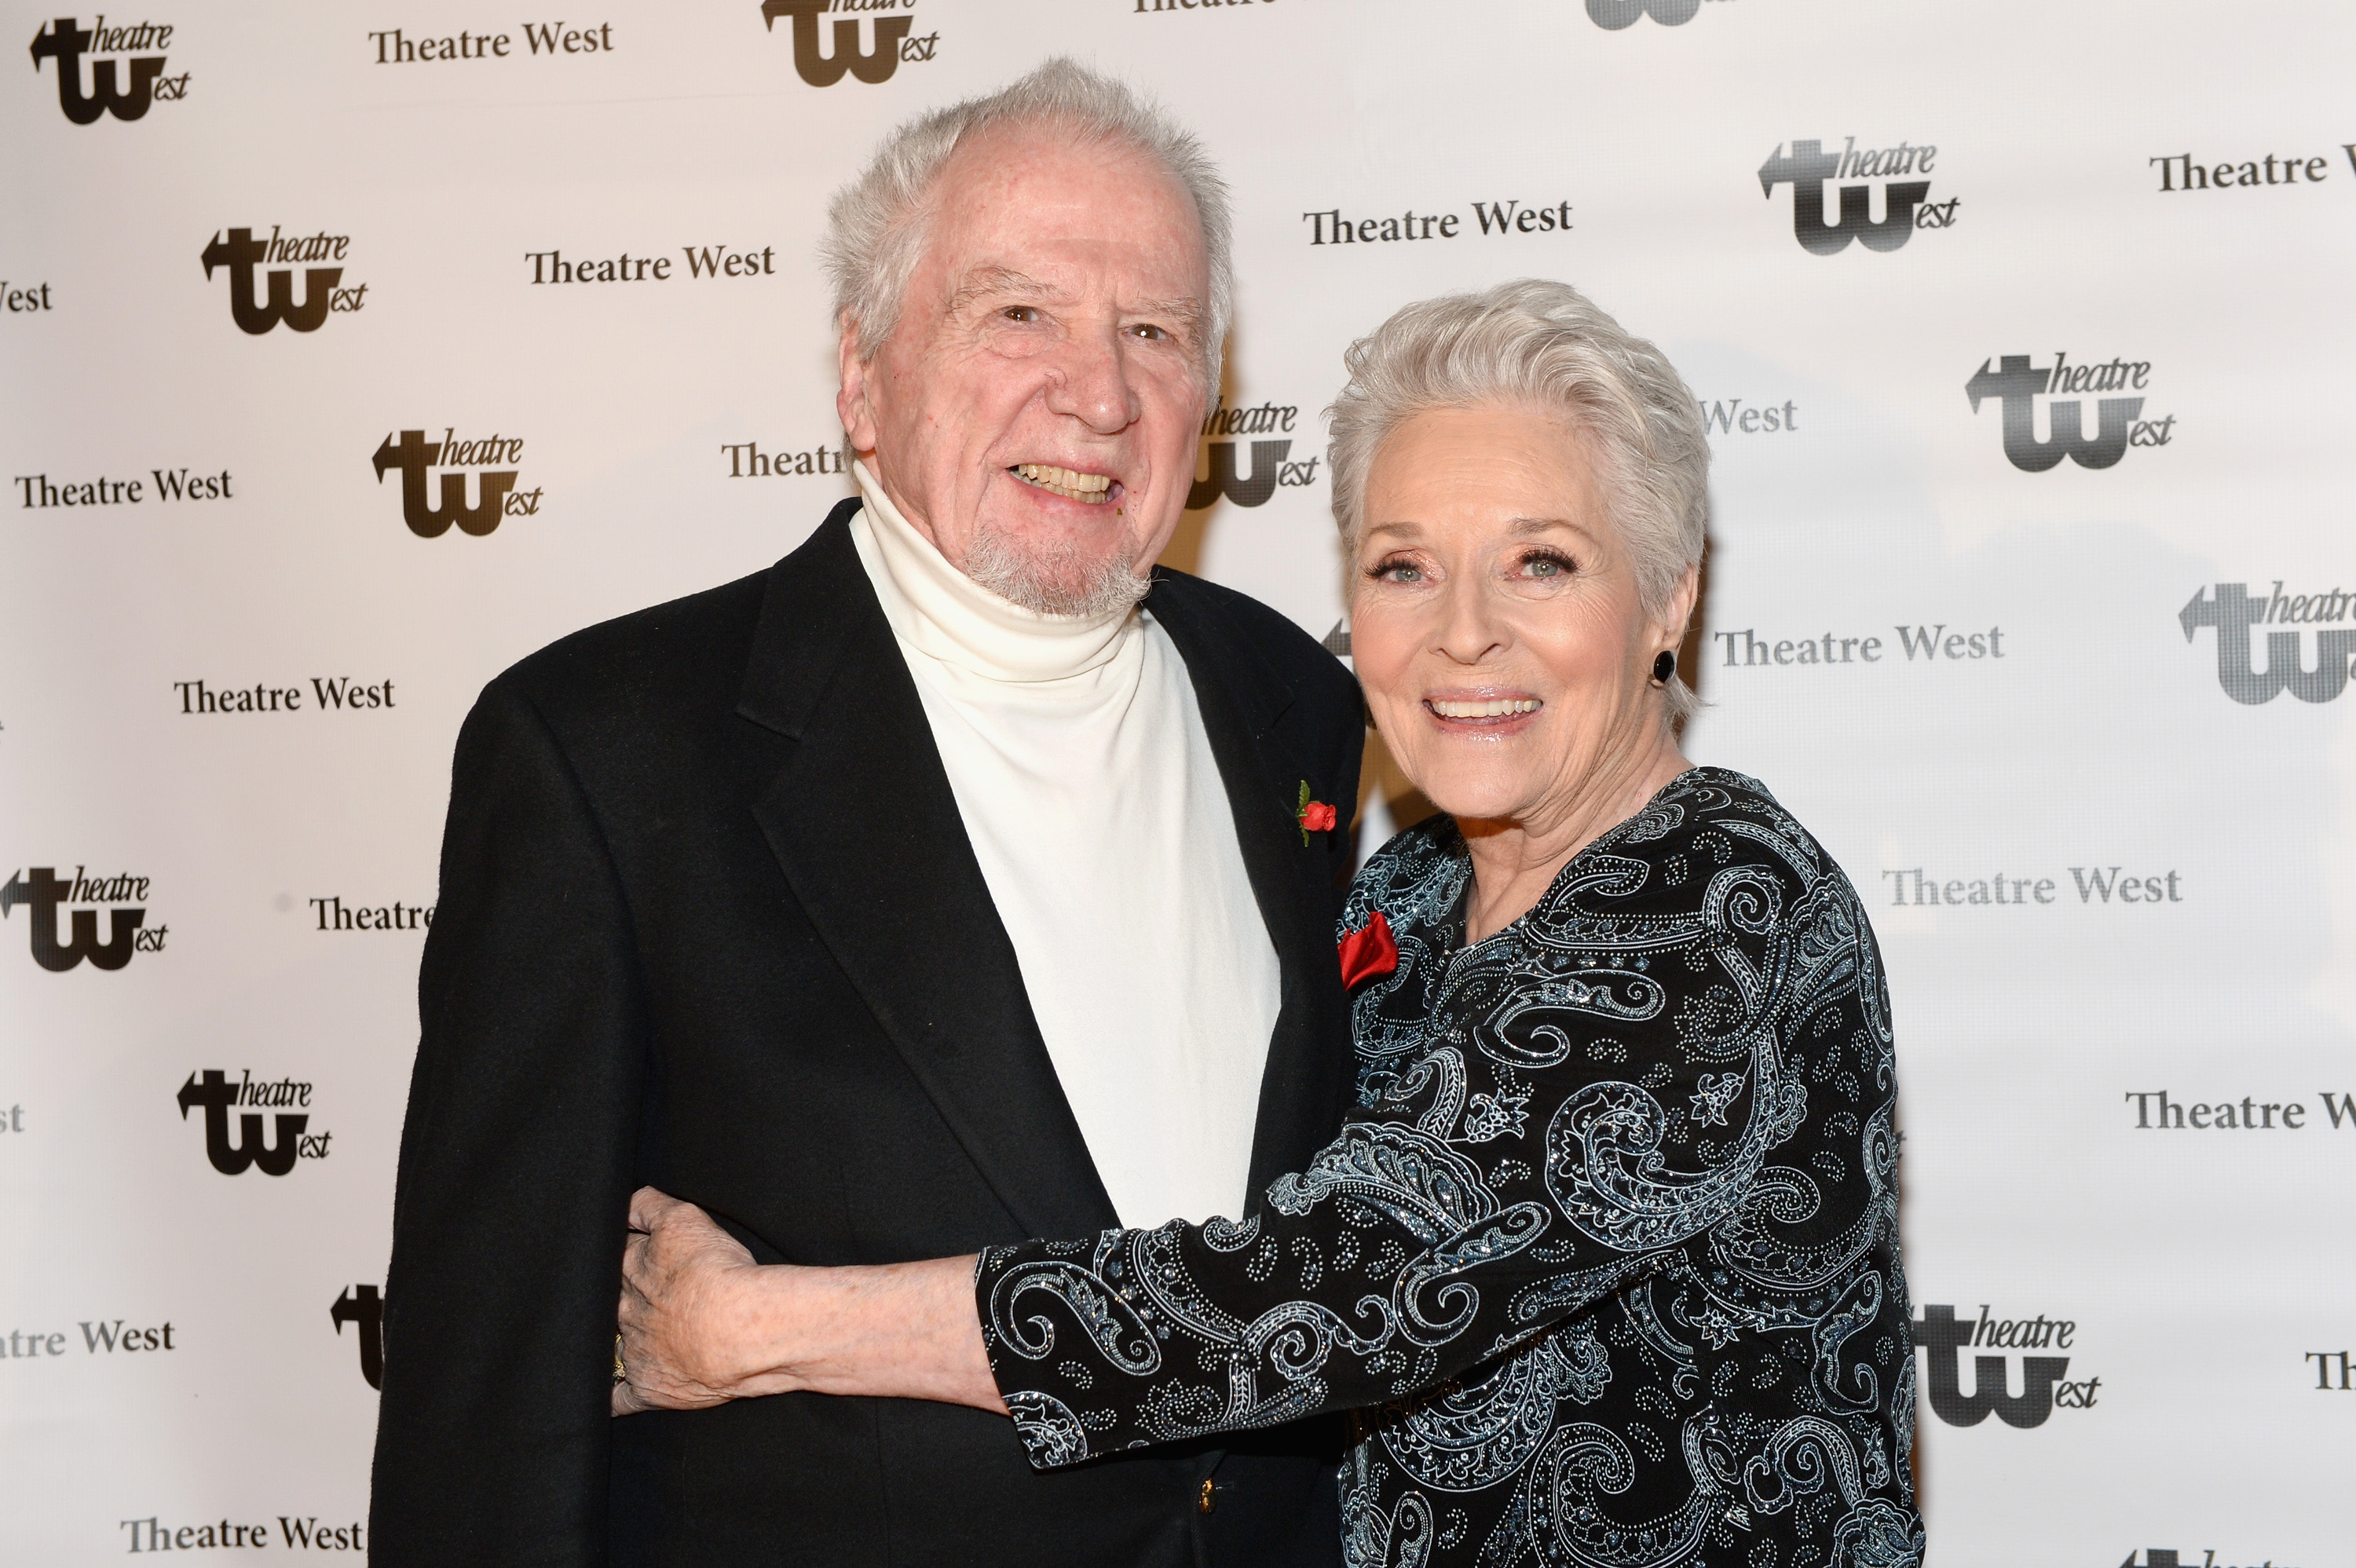 Actors Marshall Borden and Lee Meriwether at the 'Love Letters to Lee Meriwether' premiere at Theatre West on February 10, 2018, in Los Angeles, California. | Source: Getty Images